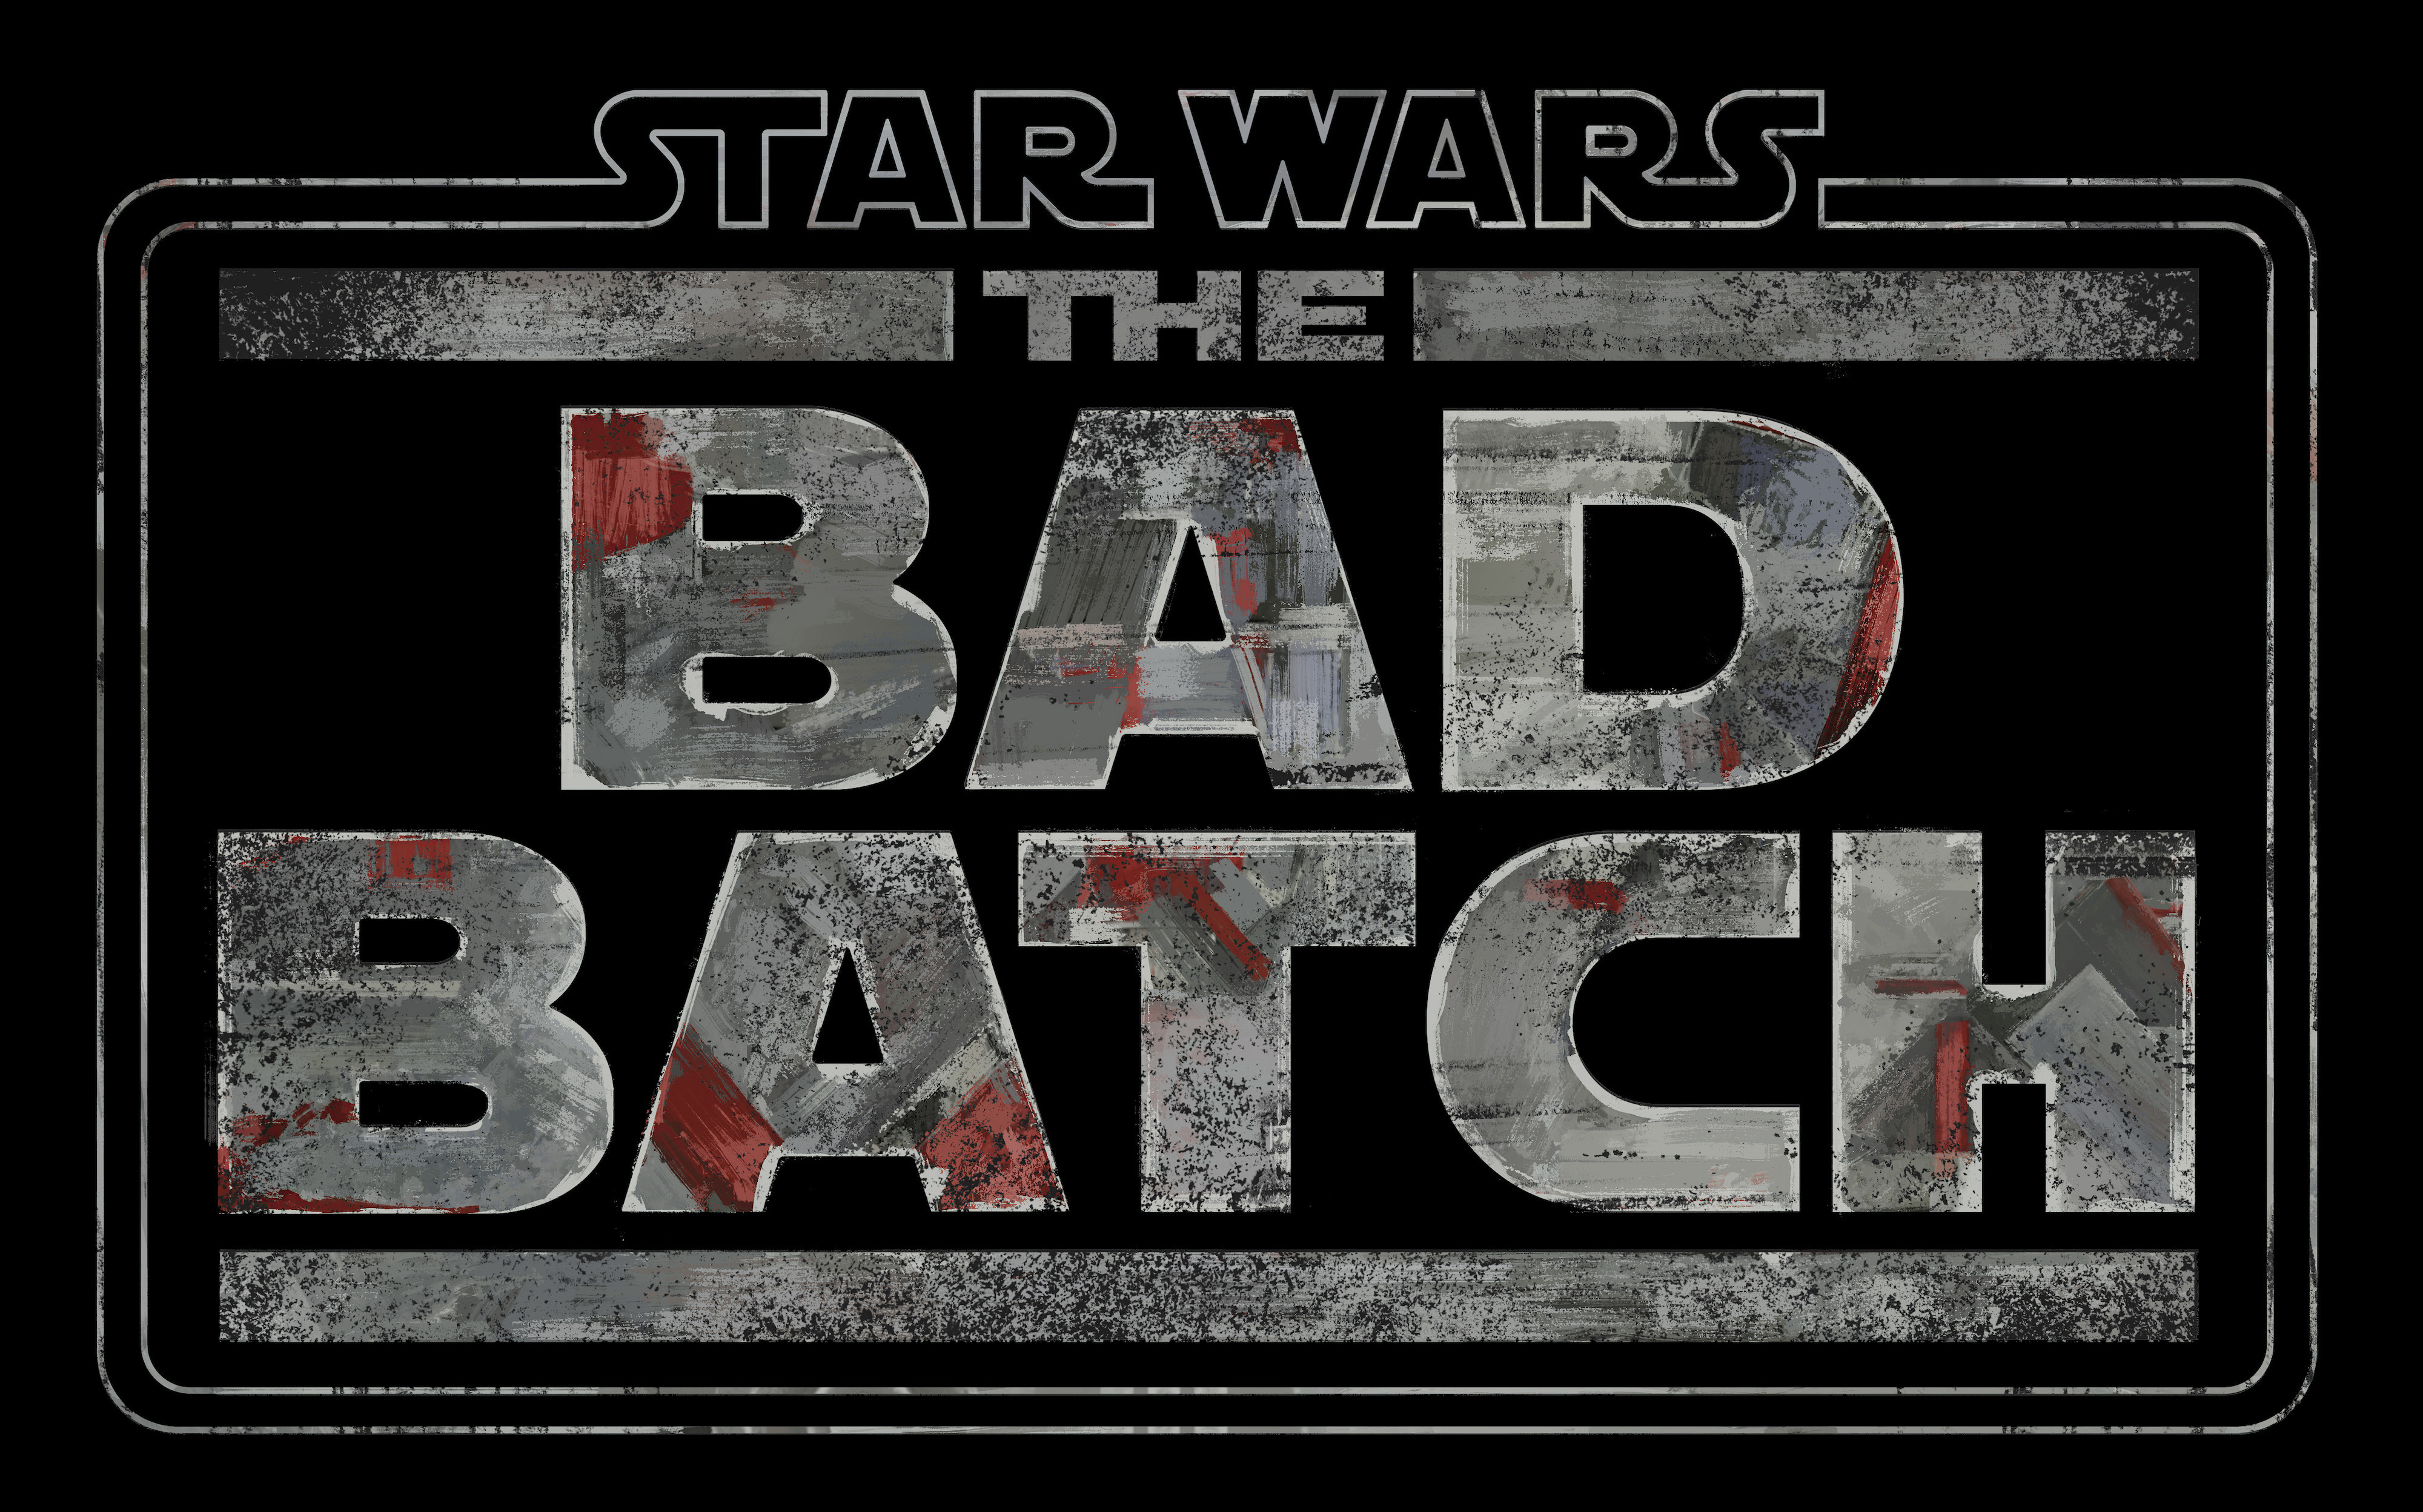 TV Show Star Wars: The Bad Batch HD Wallpaper | Background Image